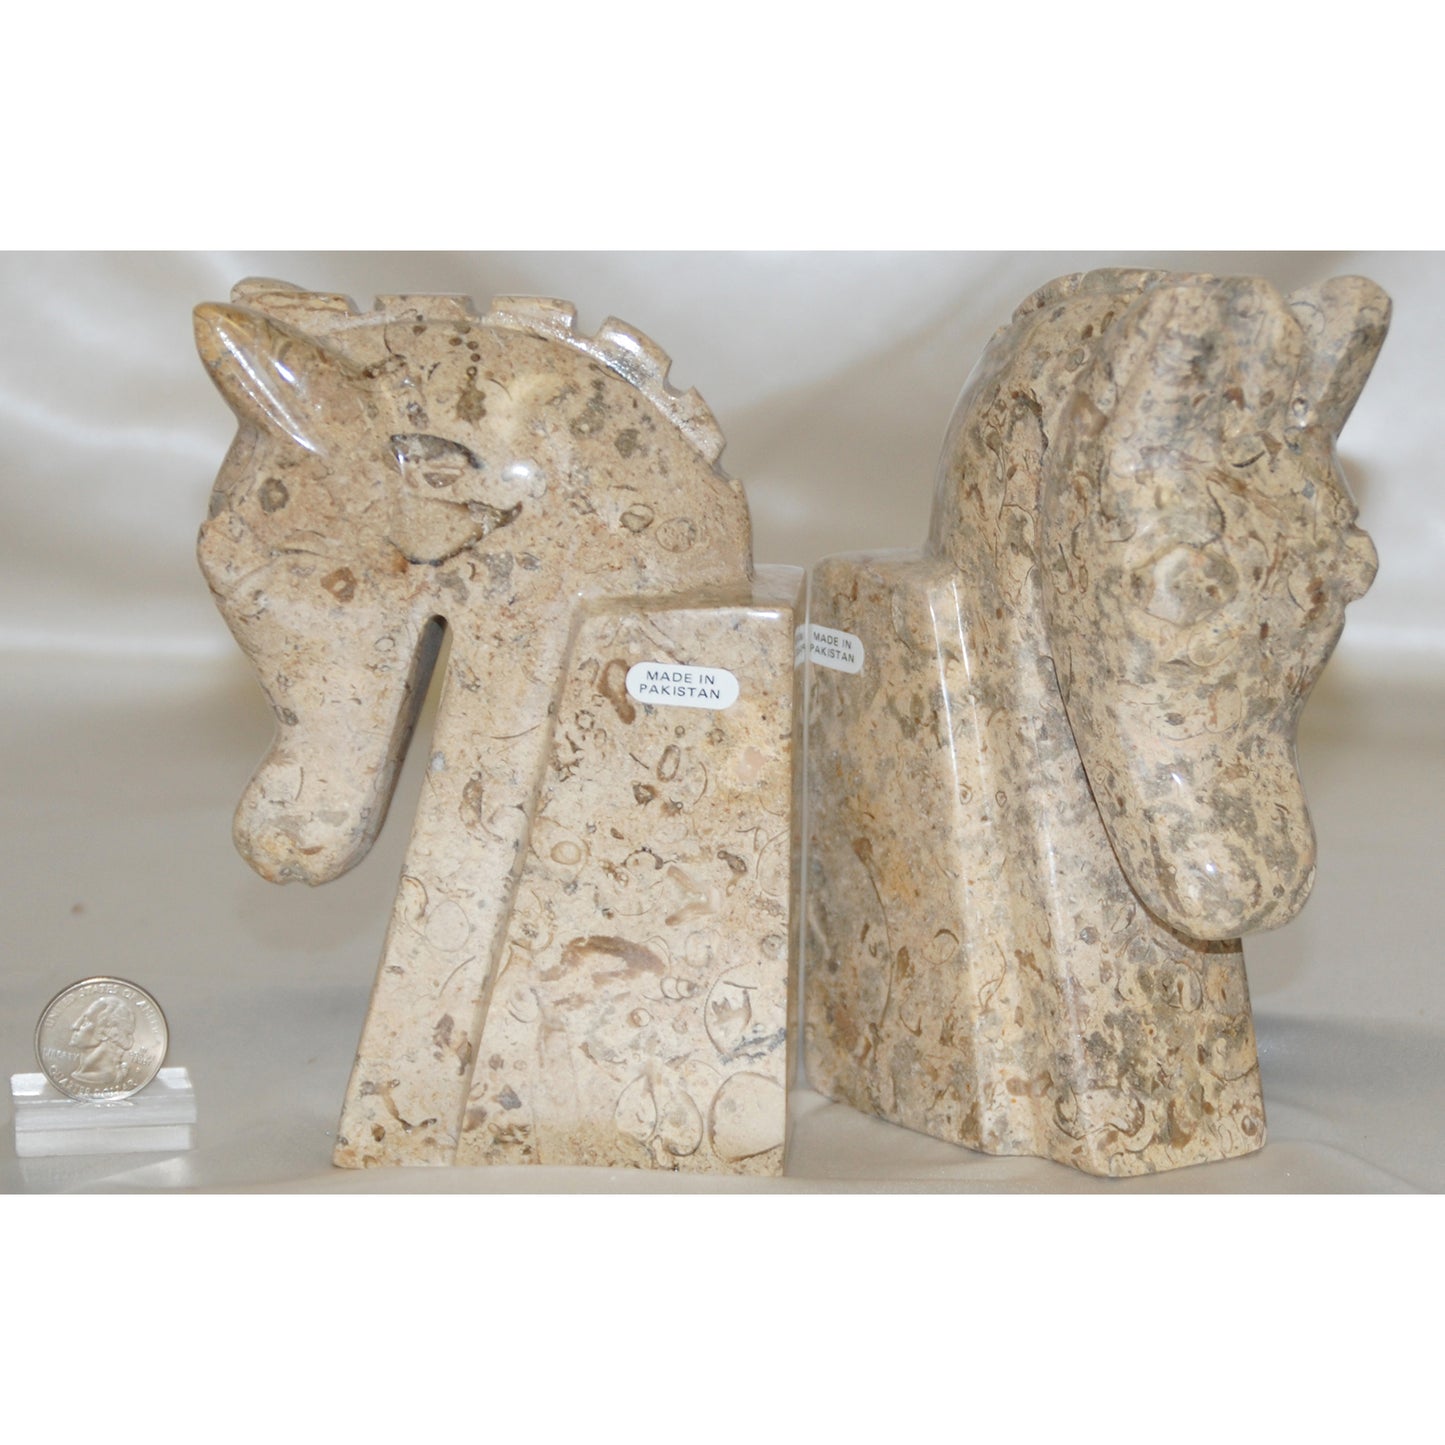 Fossil Stone Onyx Horse Head Bookends